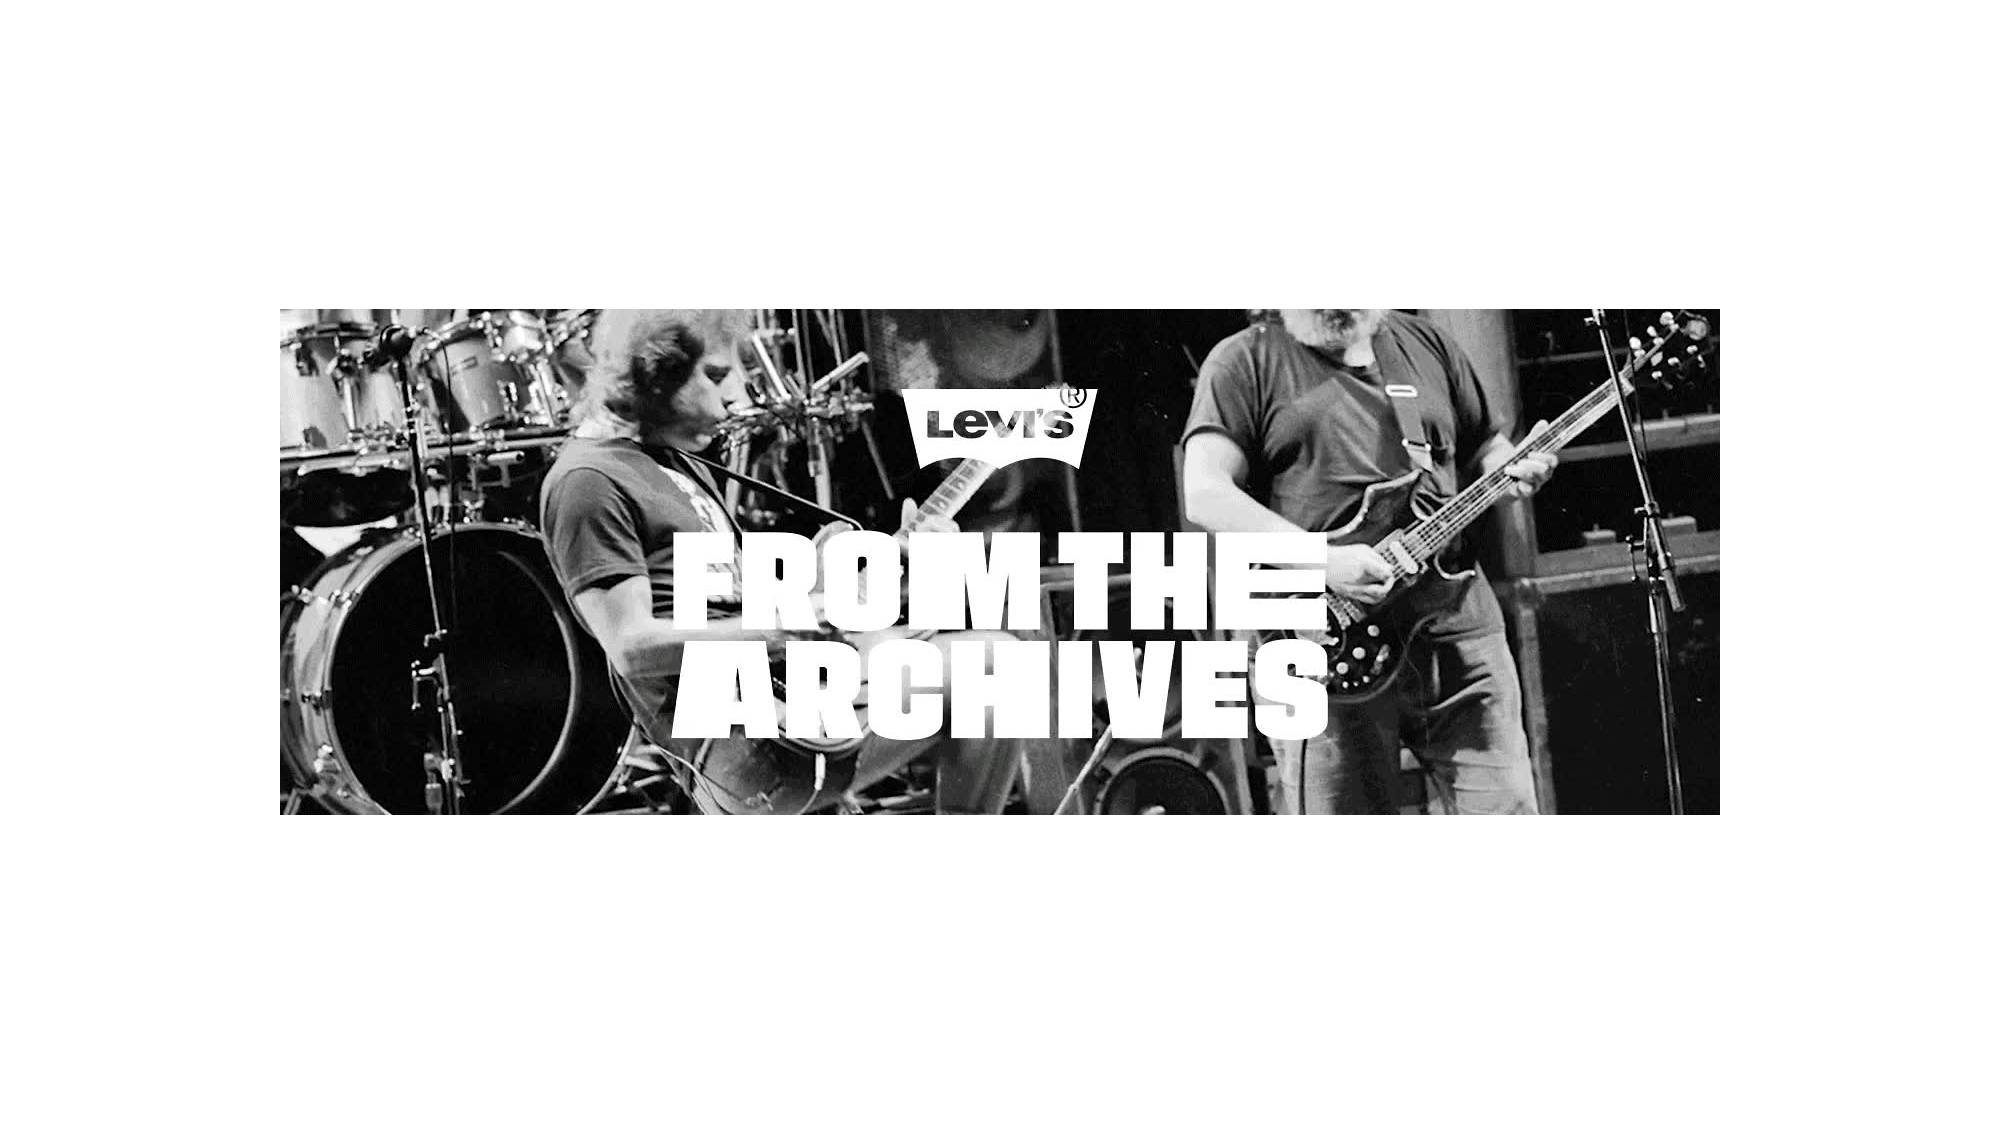 A big title saying, "from the archives" with images of the grateful dead behind